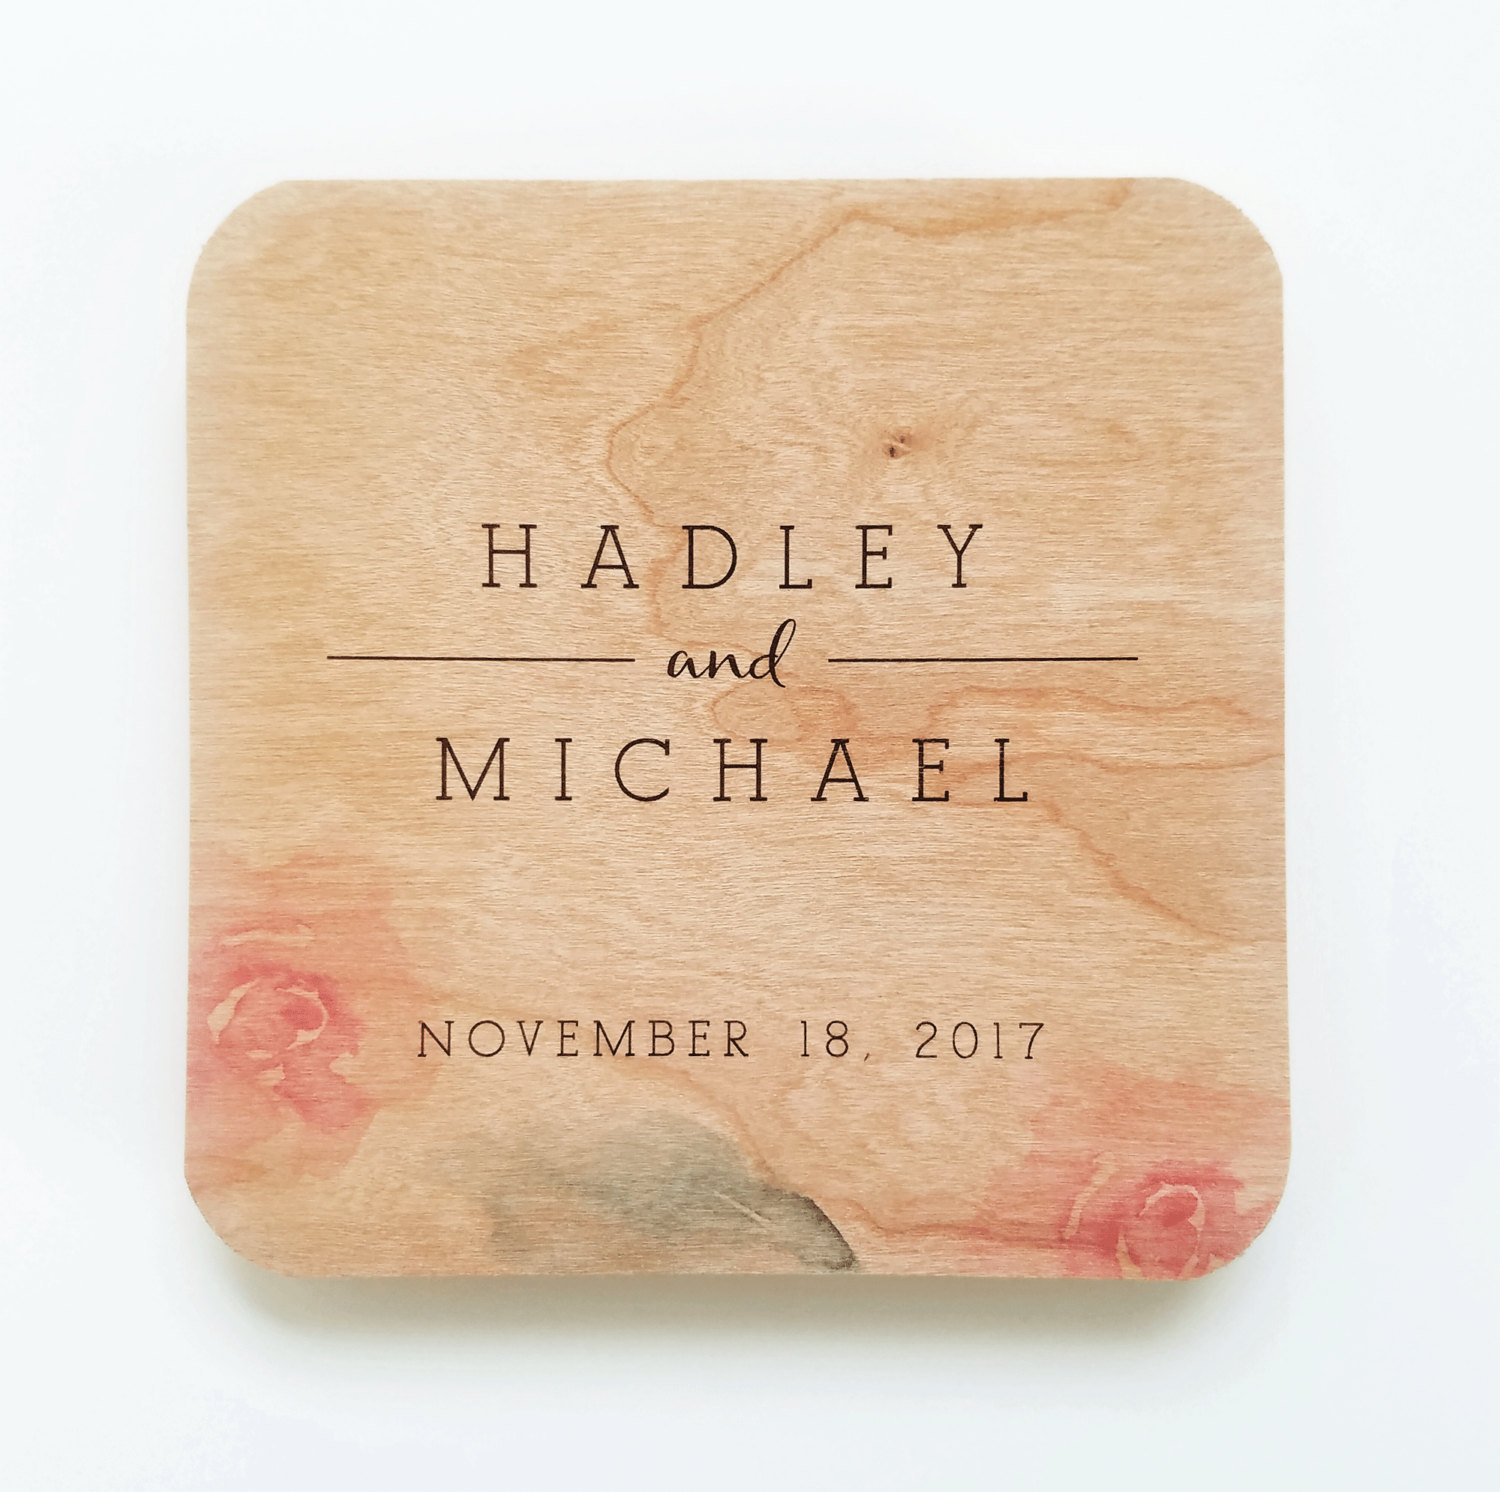 rose watercolor wedding invitations, coasters and more